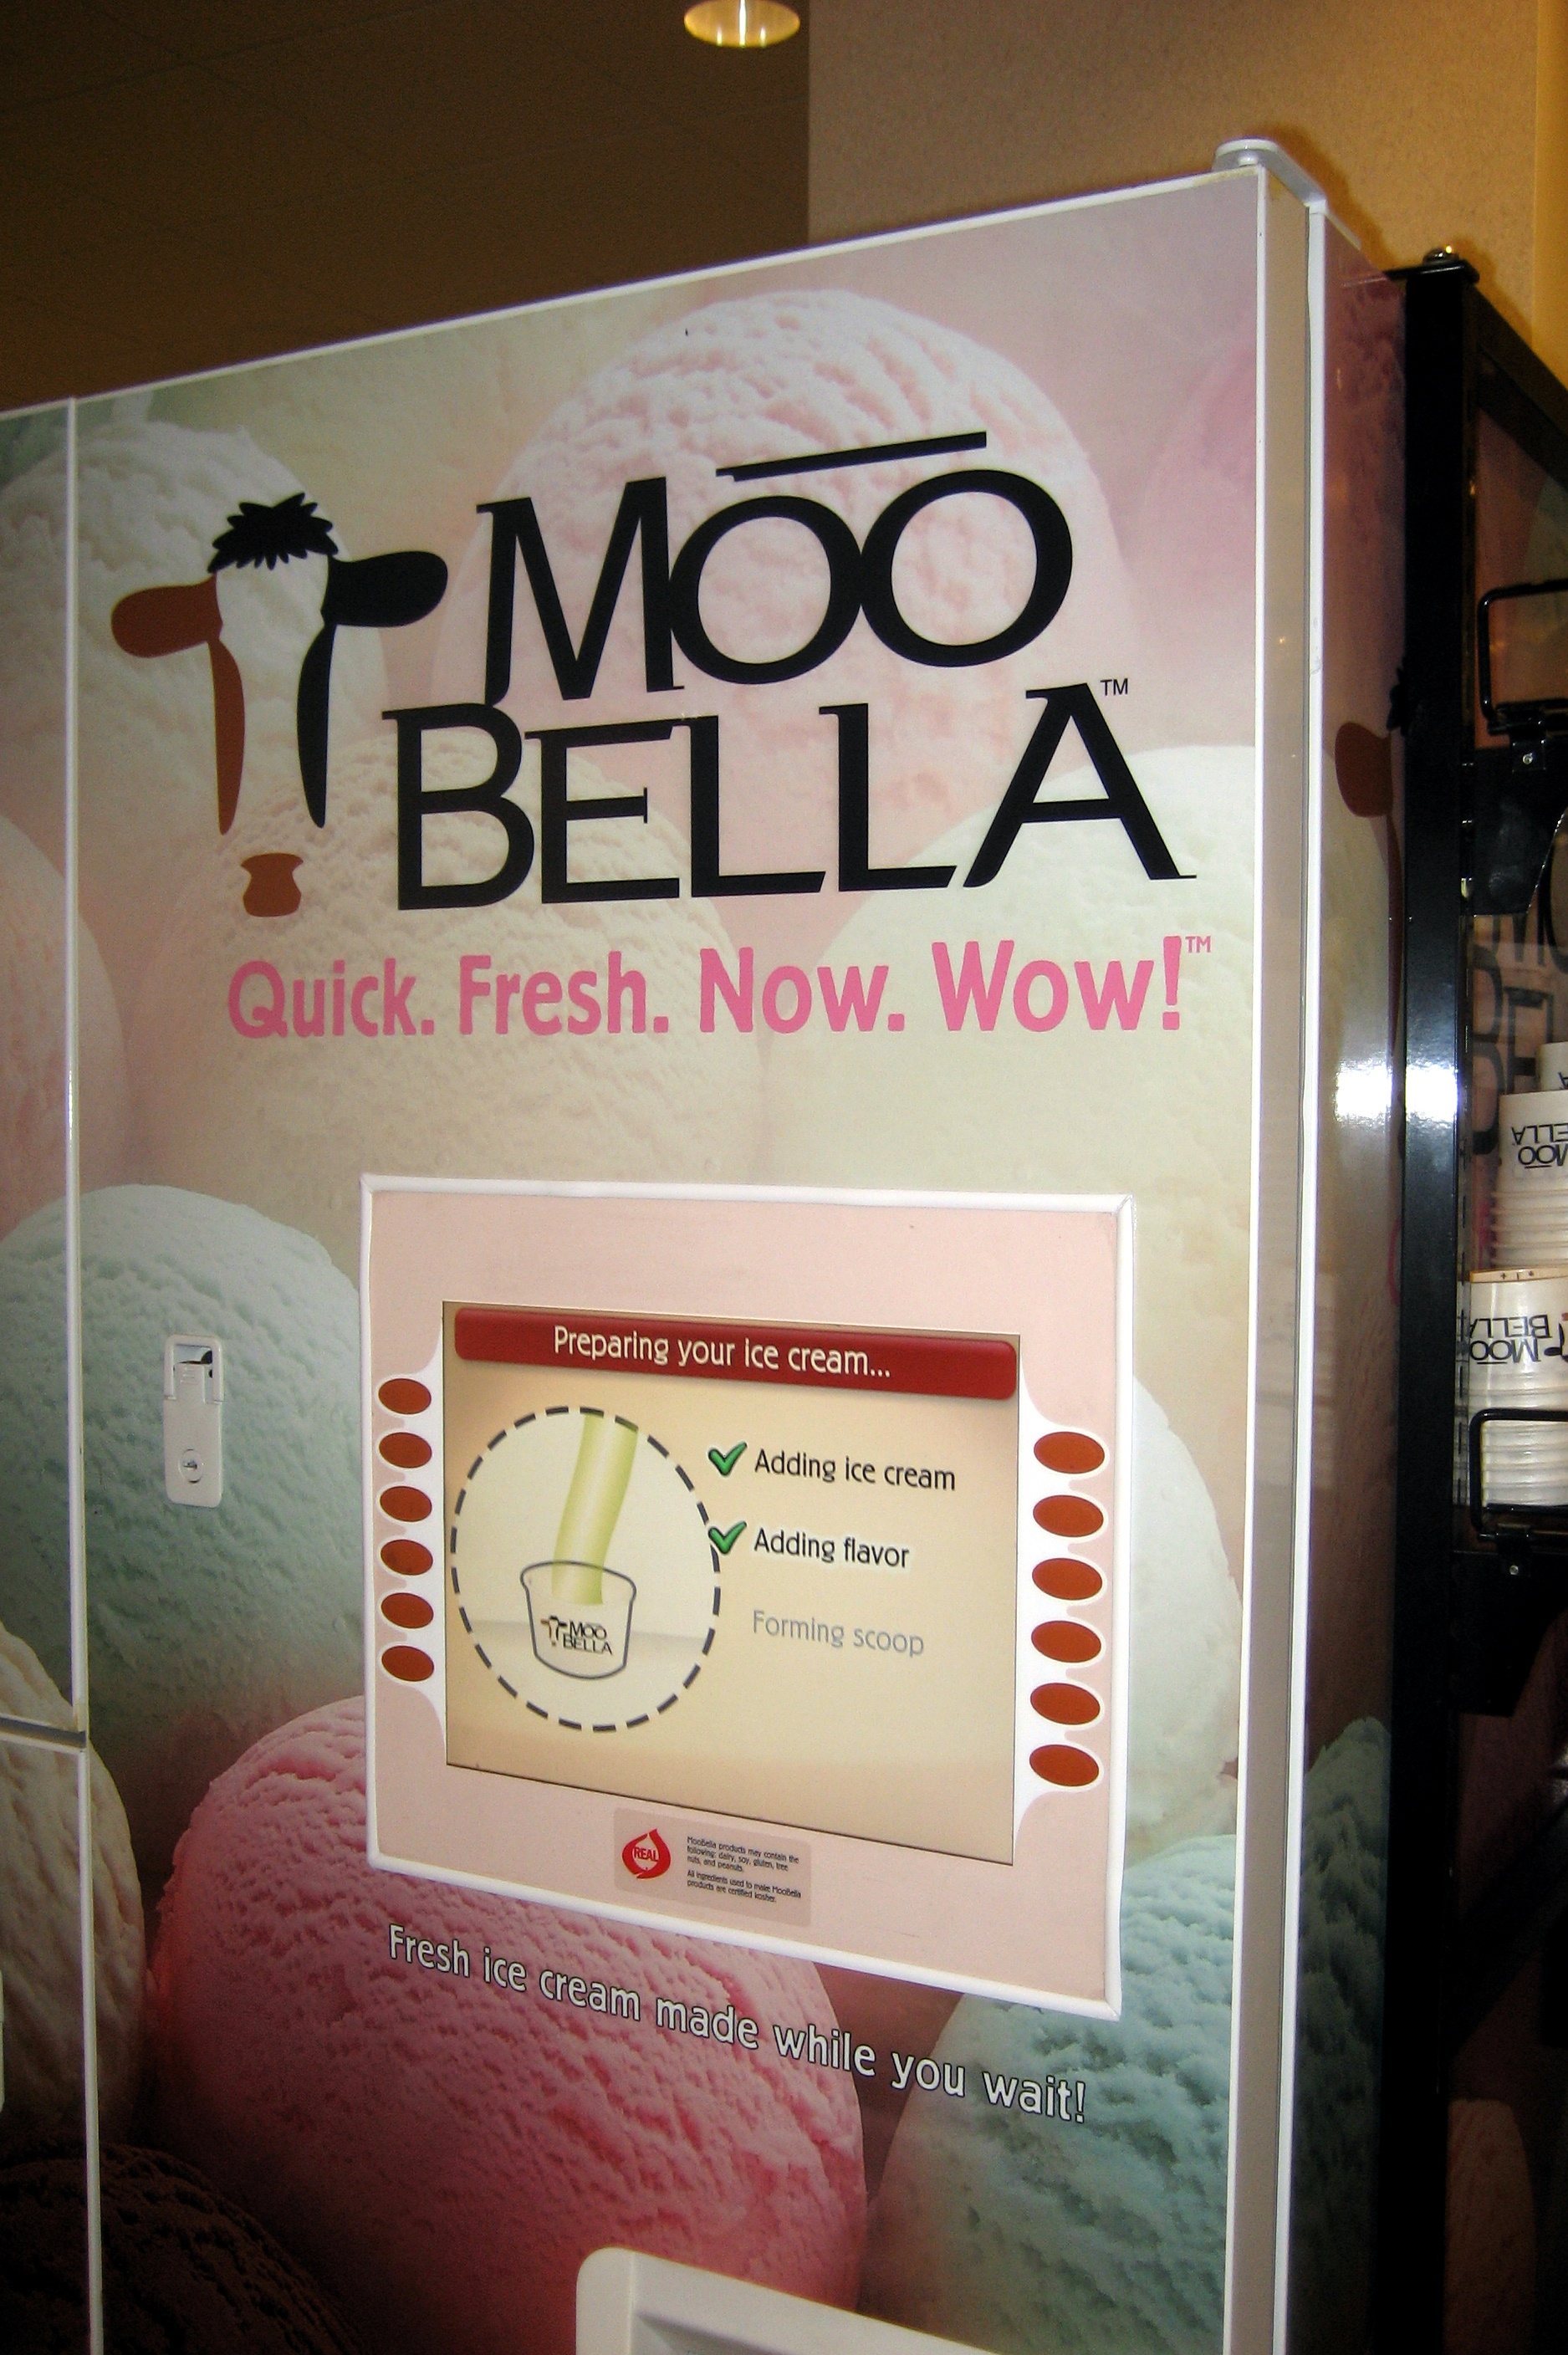 Boston - Boston University - George Sherman Union - Moo Bella machine The MooBella Ice Cream System produces a wide variety of creamy, delicious, hard-packed ice cream flavors made fresh to order in approximately 45 seconds. Consumers select the type of ice cream (currently premium or light, but soy and yogurt are coming soon), flavor (with 12 to choose from) and a mix-in (such as chocolate chips, M&M’s, walnuts, and cookies & creme) of their choice and the machine produces a 4.5 ounce scoop of mouth-watering ice cream. It tastes just so so.